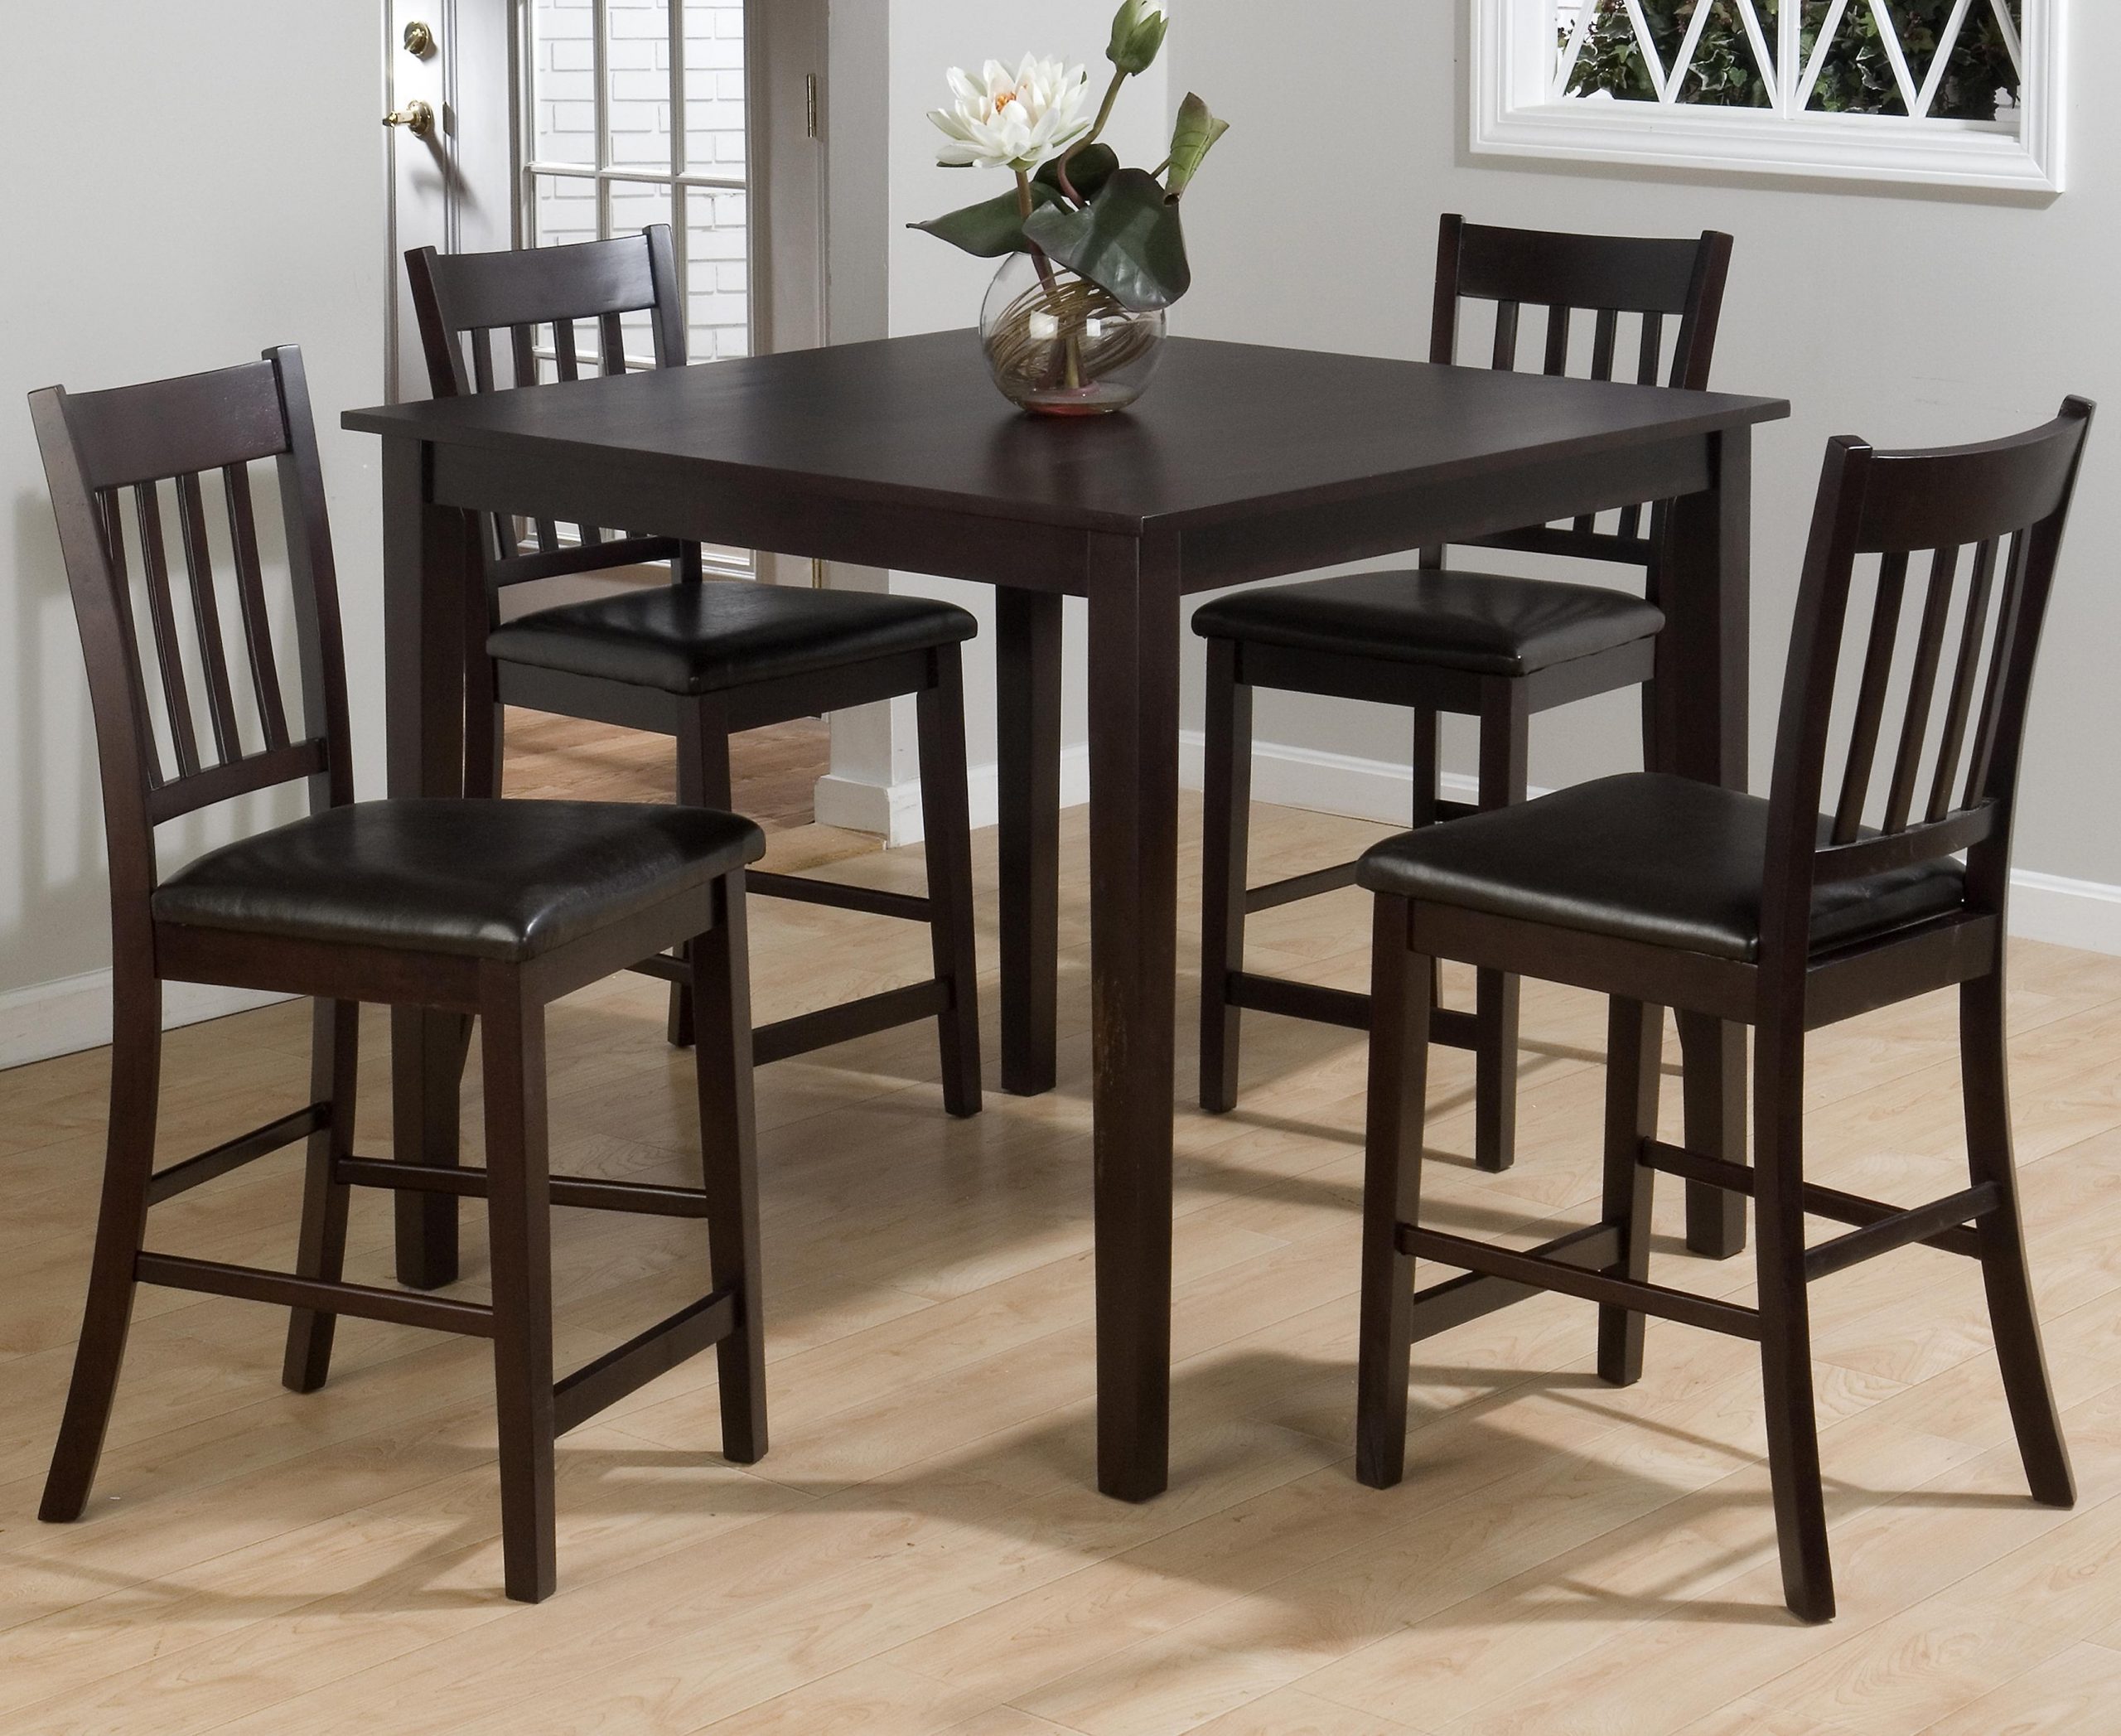 Big Lots Kitchen Tables Kitchen Tables Sets for size 3428 X 2805